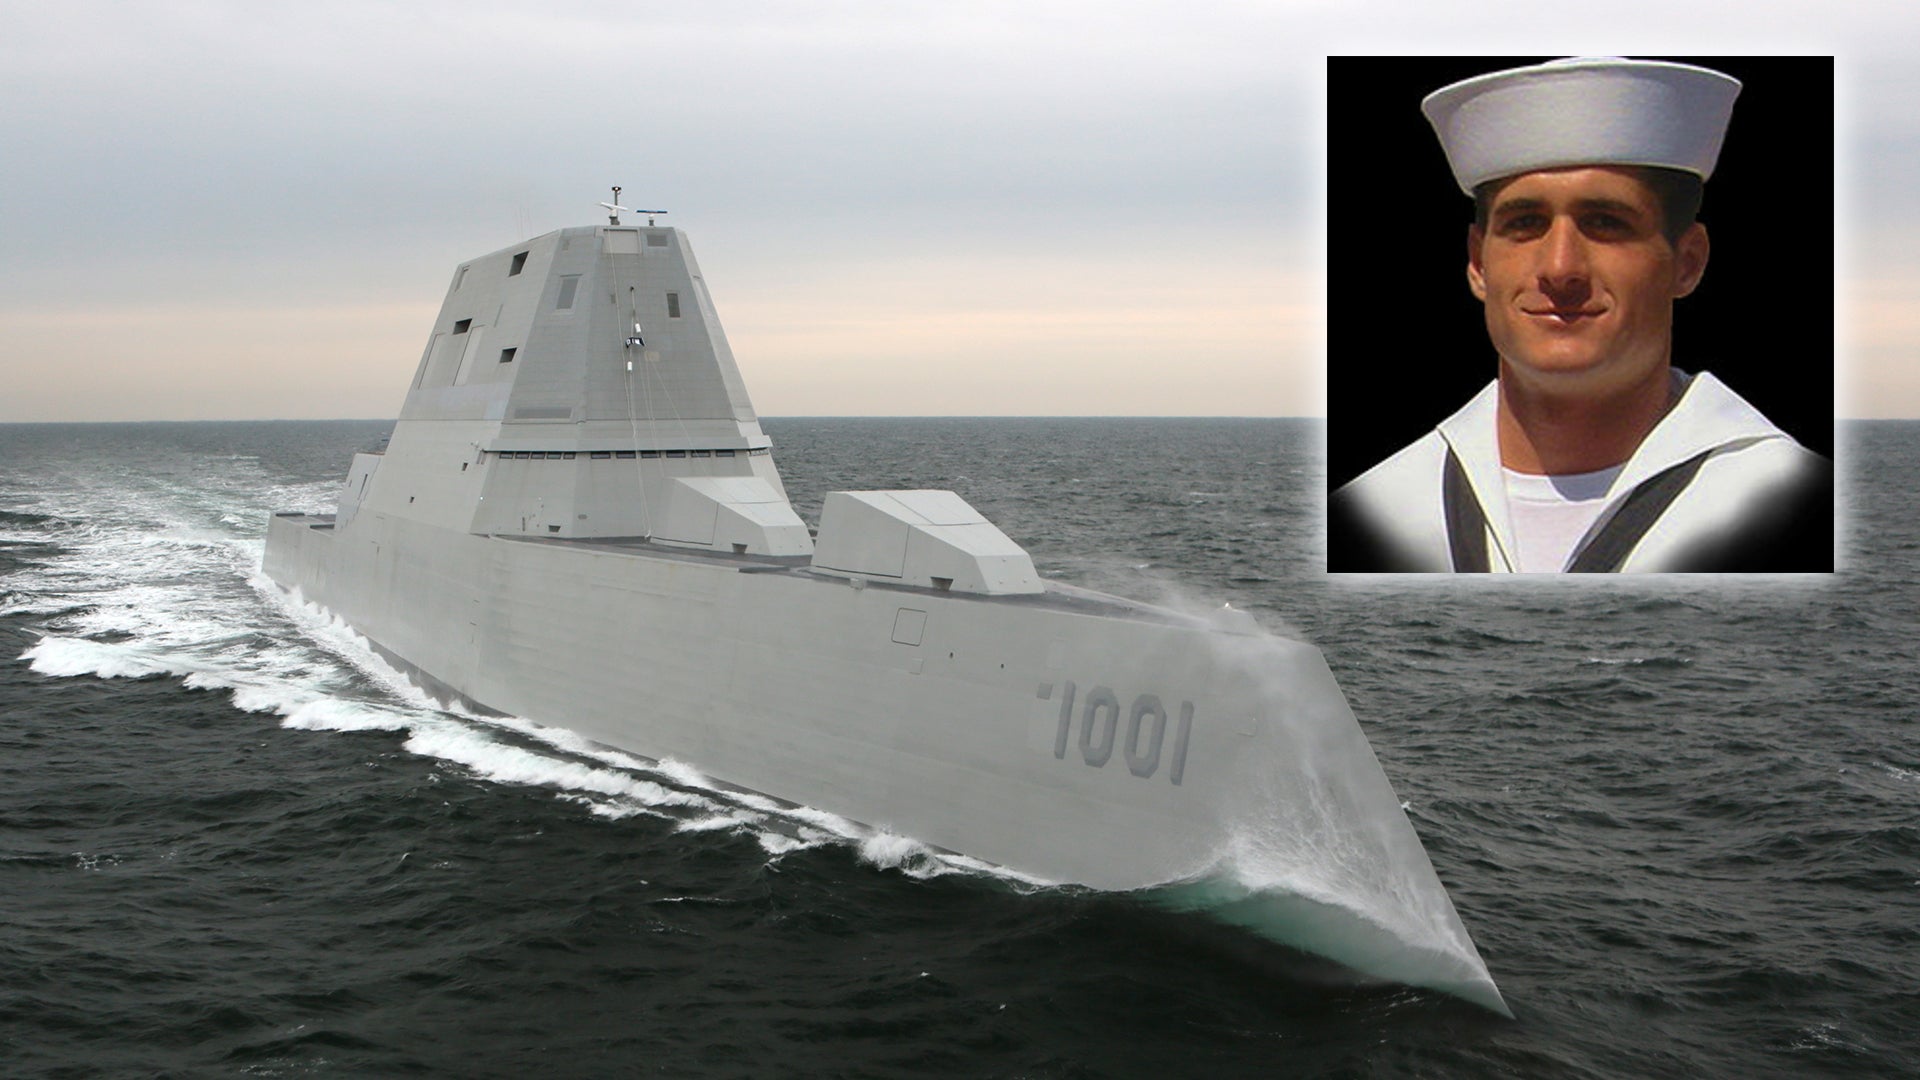 America’s Newest Stealth Destroyer Has The Greatest Namesake To Live Up To